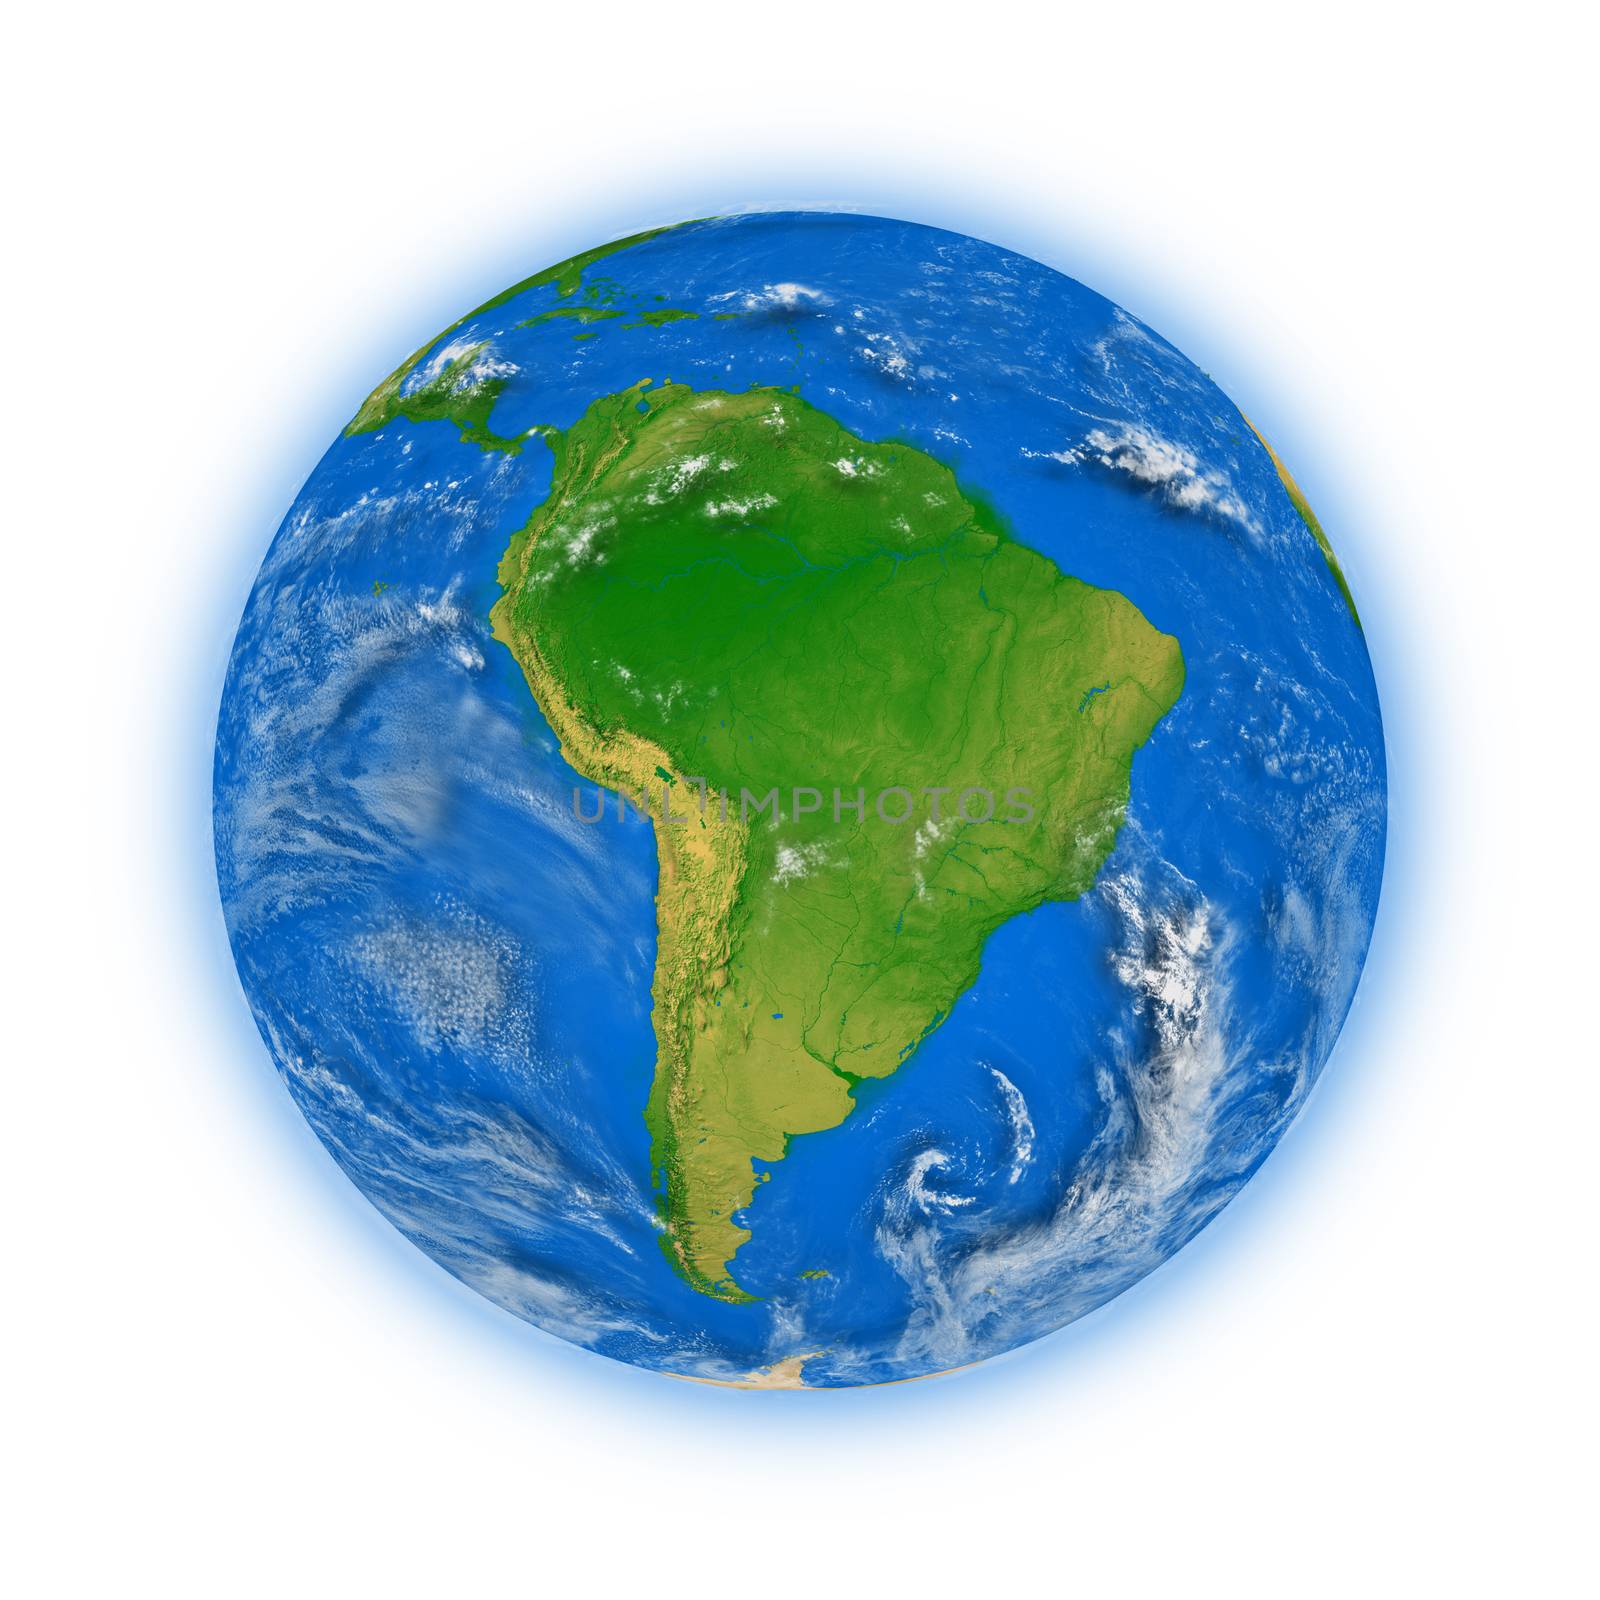 South America on planet Earth by Harvepino